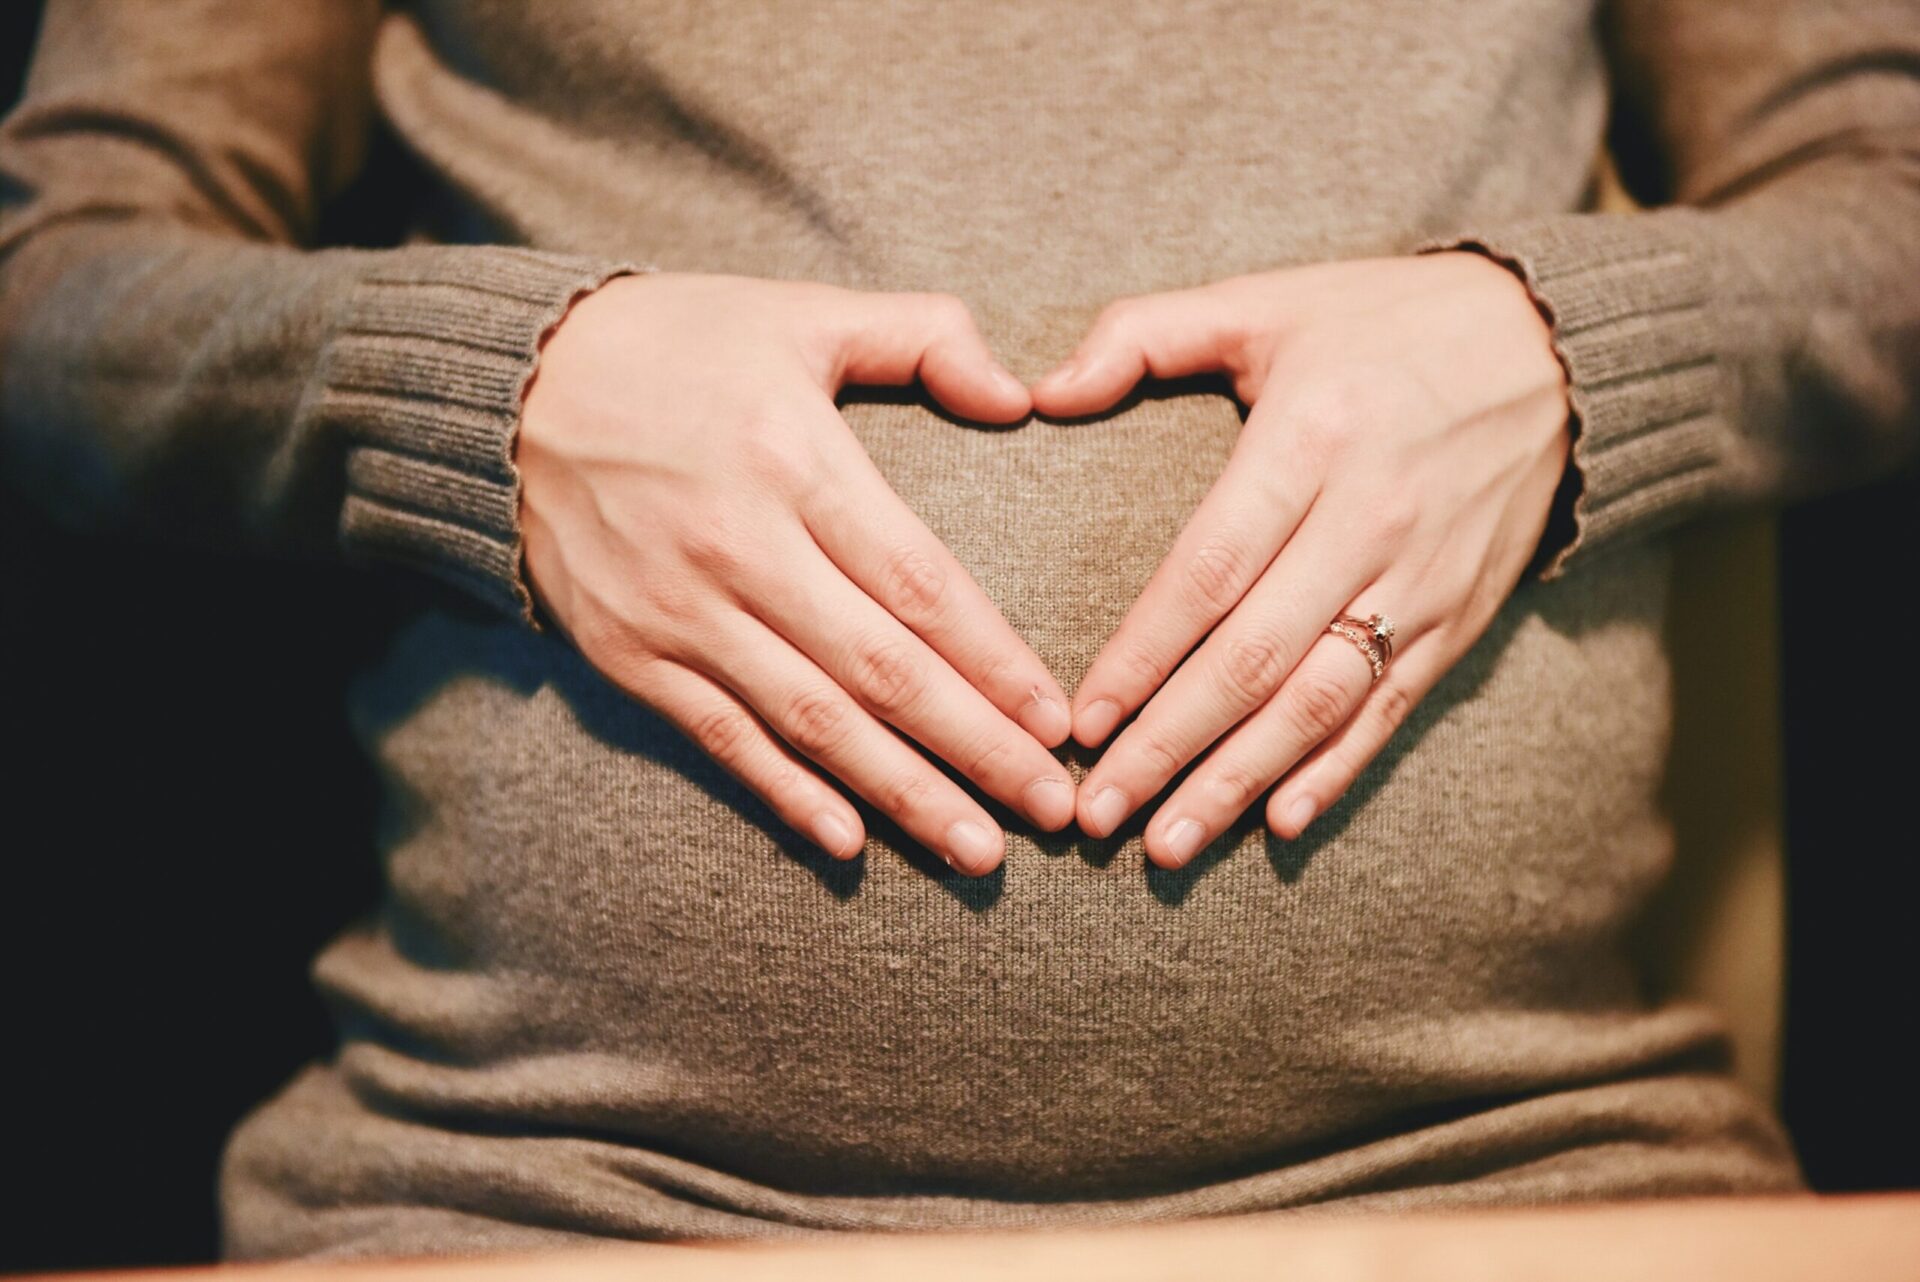 Close-up image of a woman holding her hands in the shape of a heart over her pregnant belly.